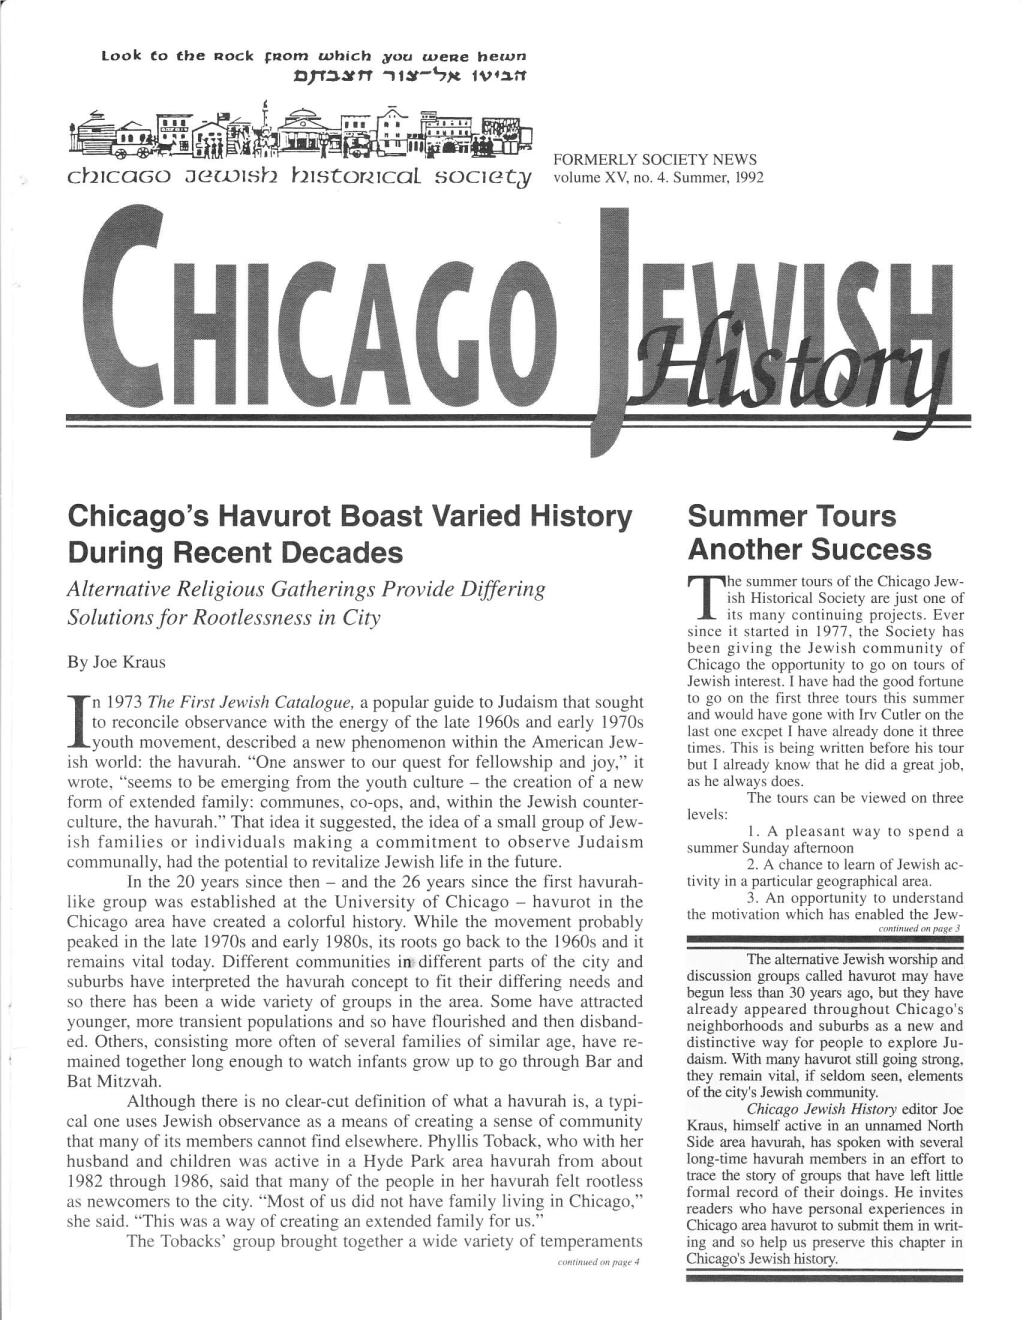 Another Success Chicago's Havurot Boast Varied History Summer Tours During Recent Decades